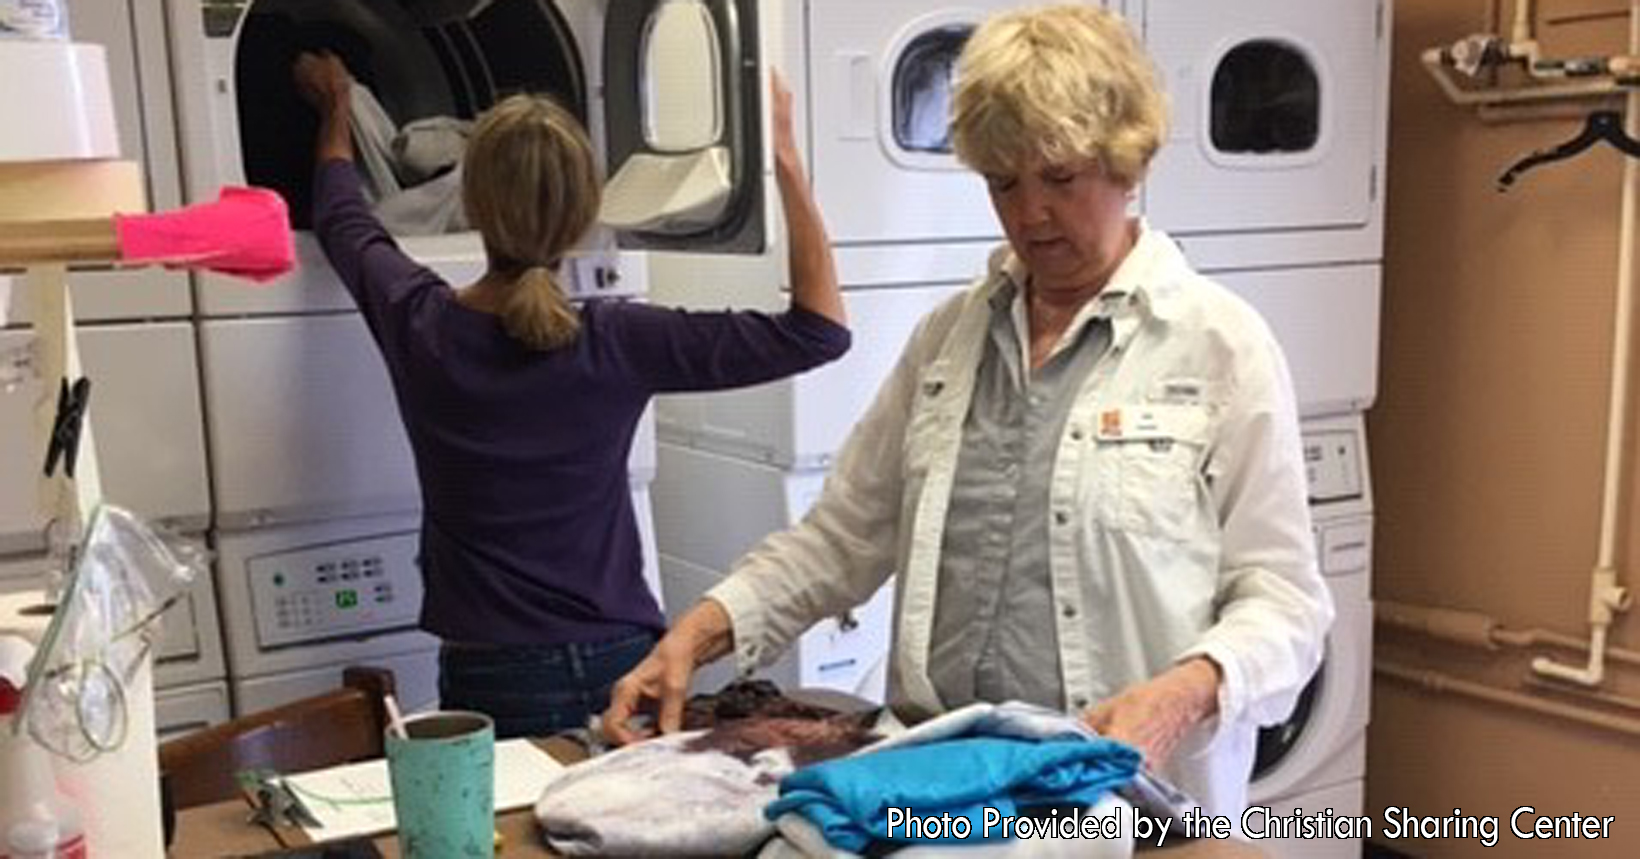 Wendy Shiner captures a moment where volunteers are helping in the laundry room. The Christian Sharing Center could not operate effectively without the help from these great individuals. Volunteers have saved the project over $1.4M in labor expenses volunteering weekly. Over 1,198 bags of laundry have been washed and folded.